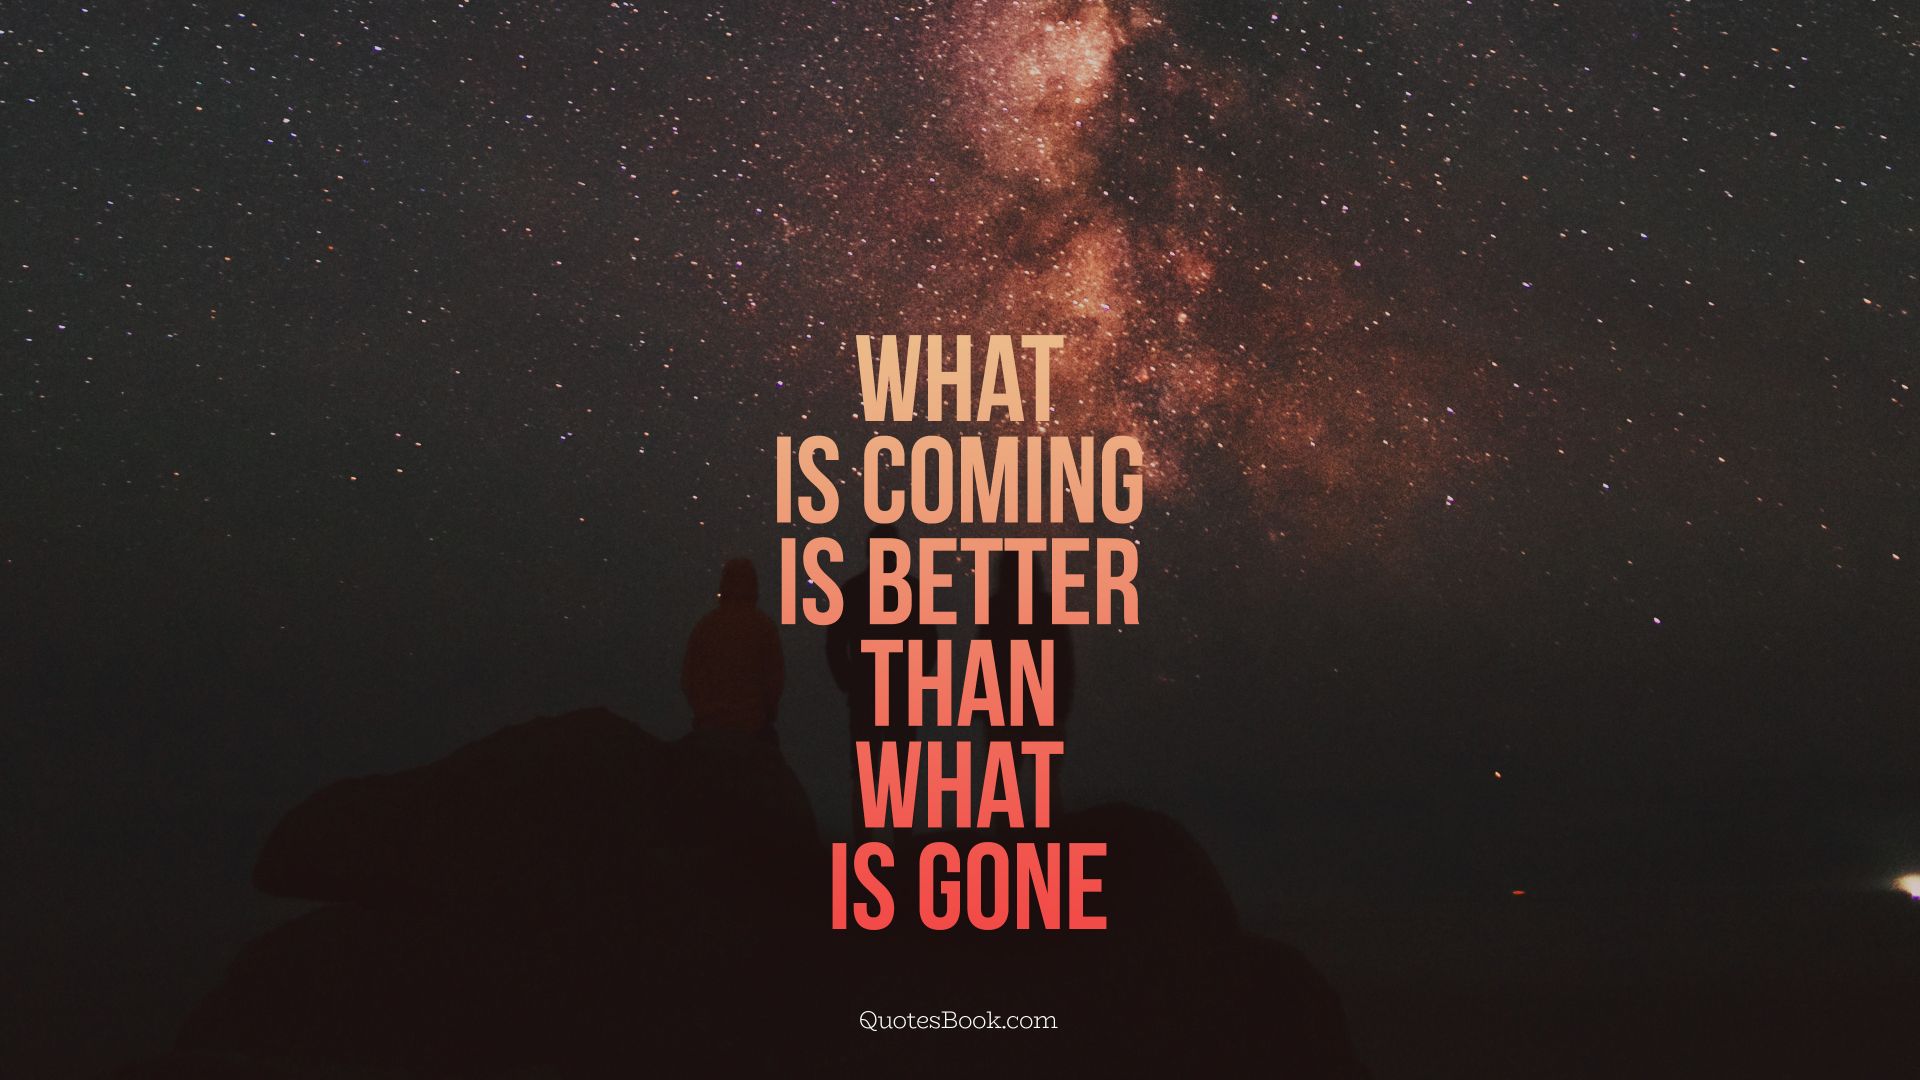 What is coming is better than what is gone